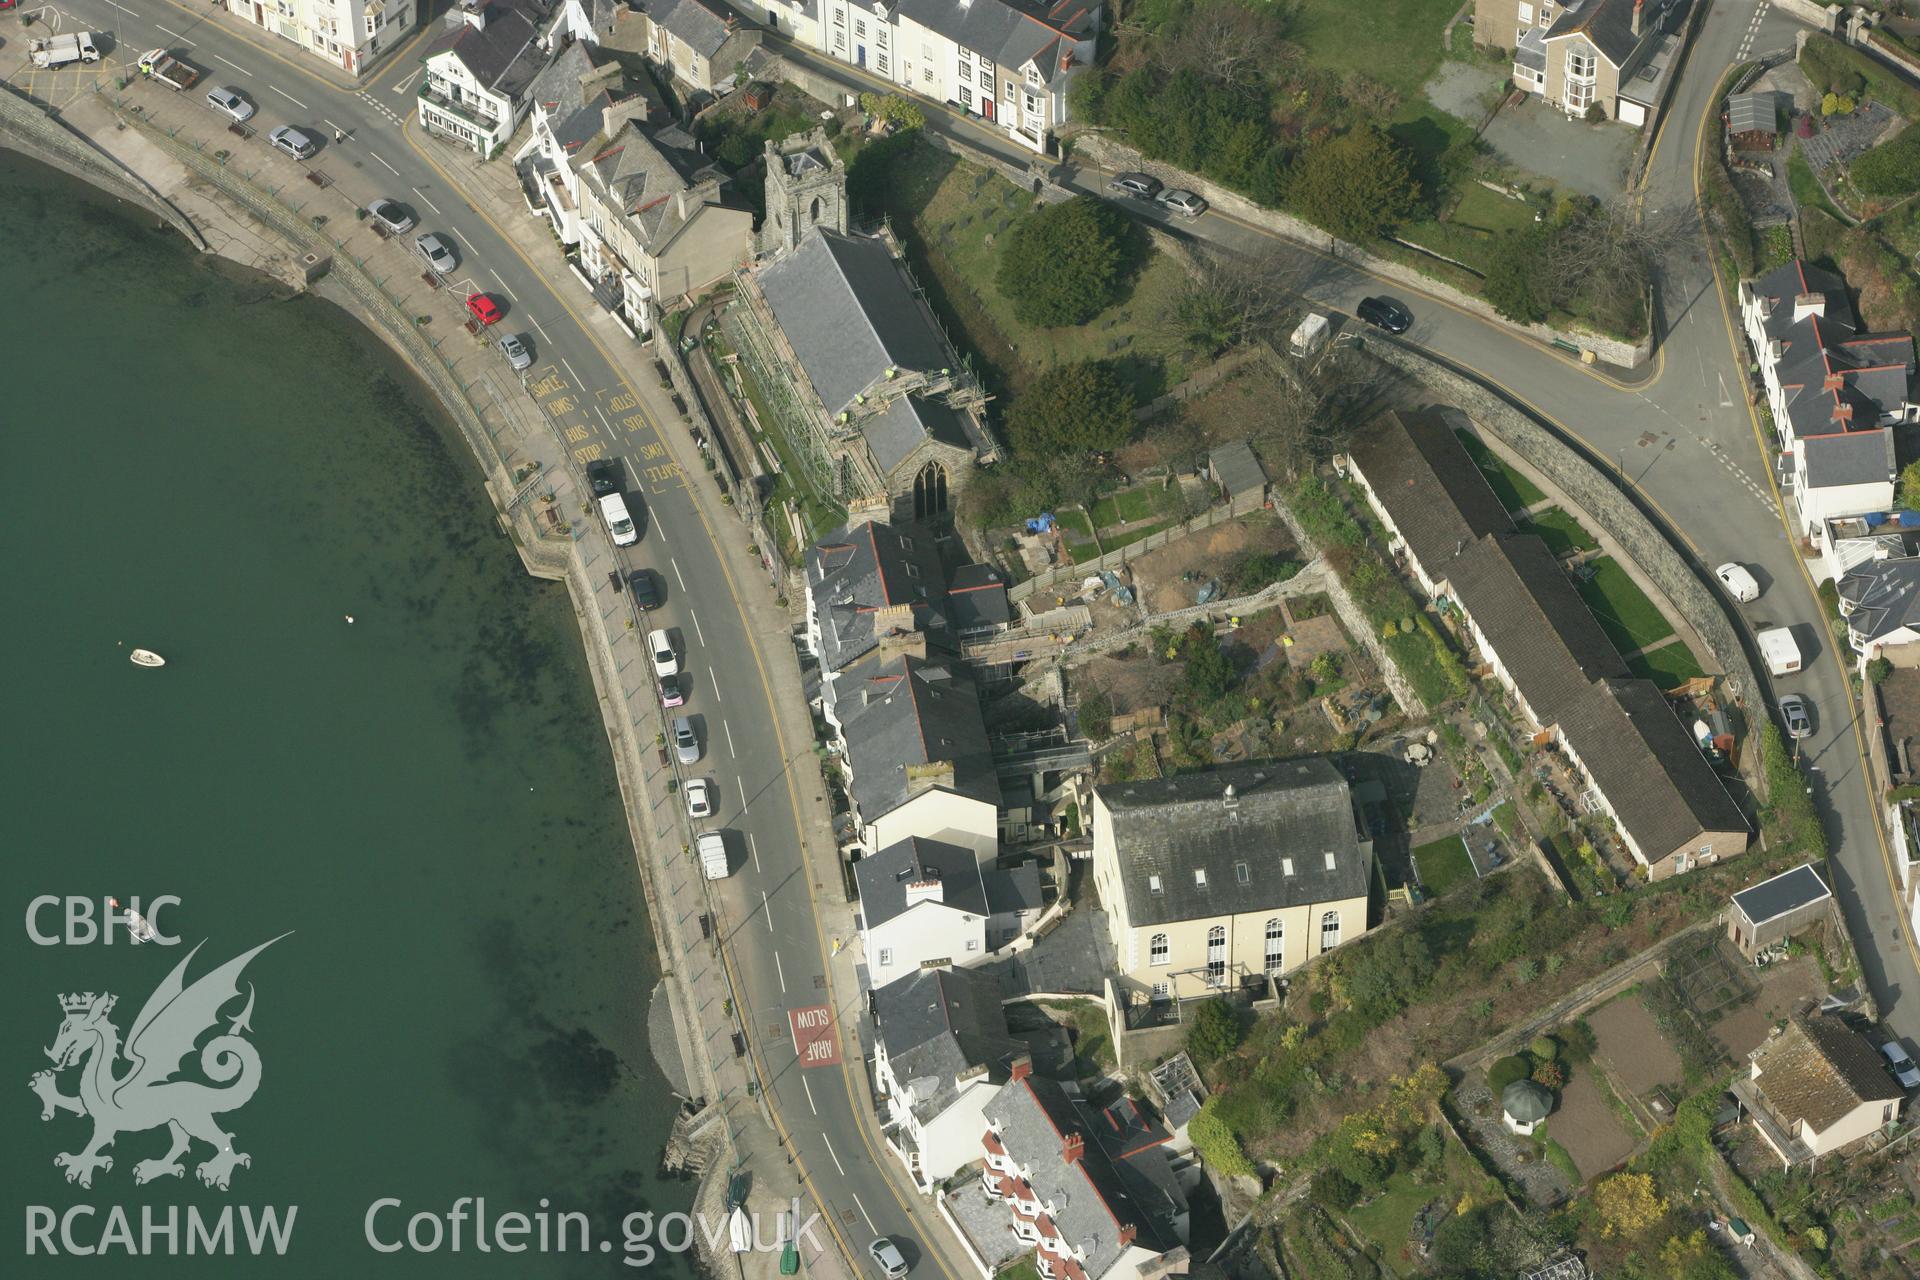 RCAHMW colour oblique photograph of Aberdovey. Taken by Toby Driver on 25/03/2011.